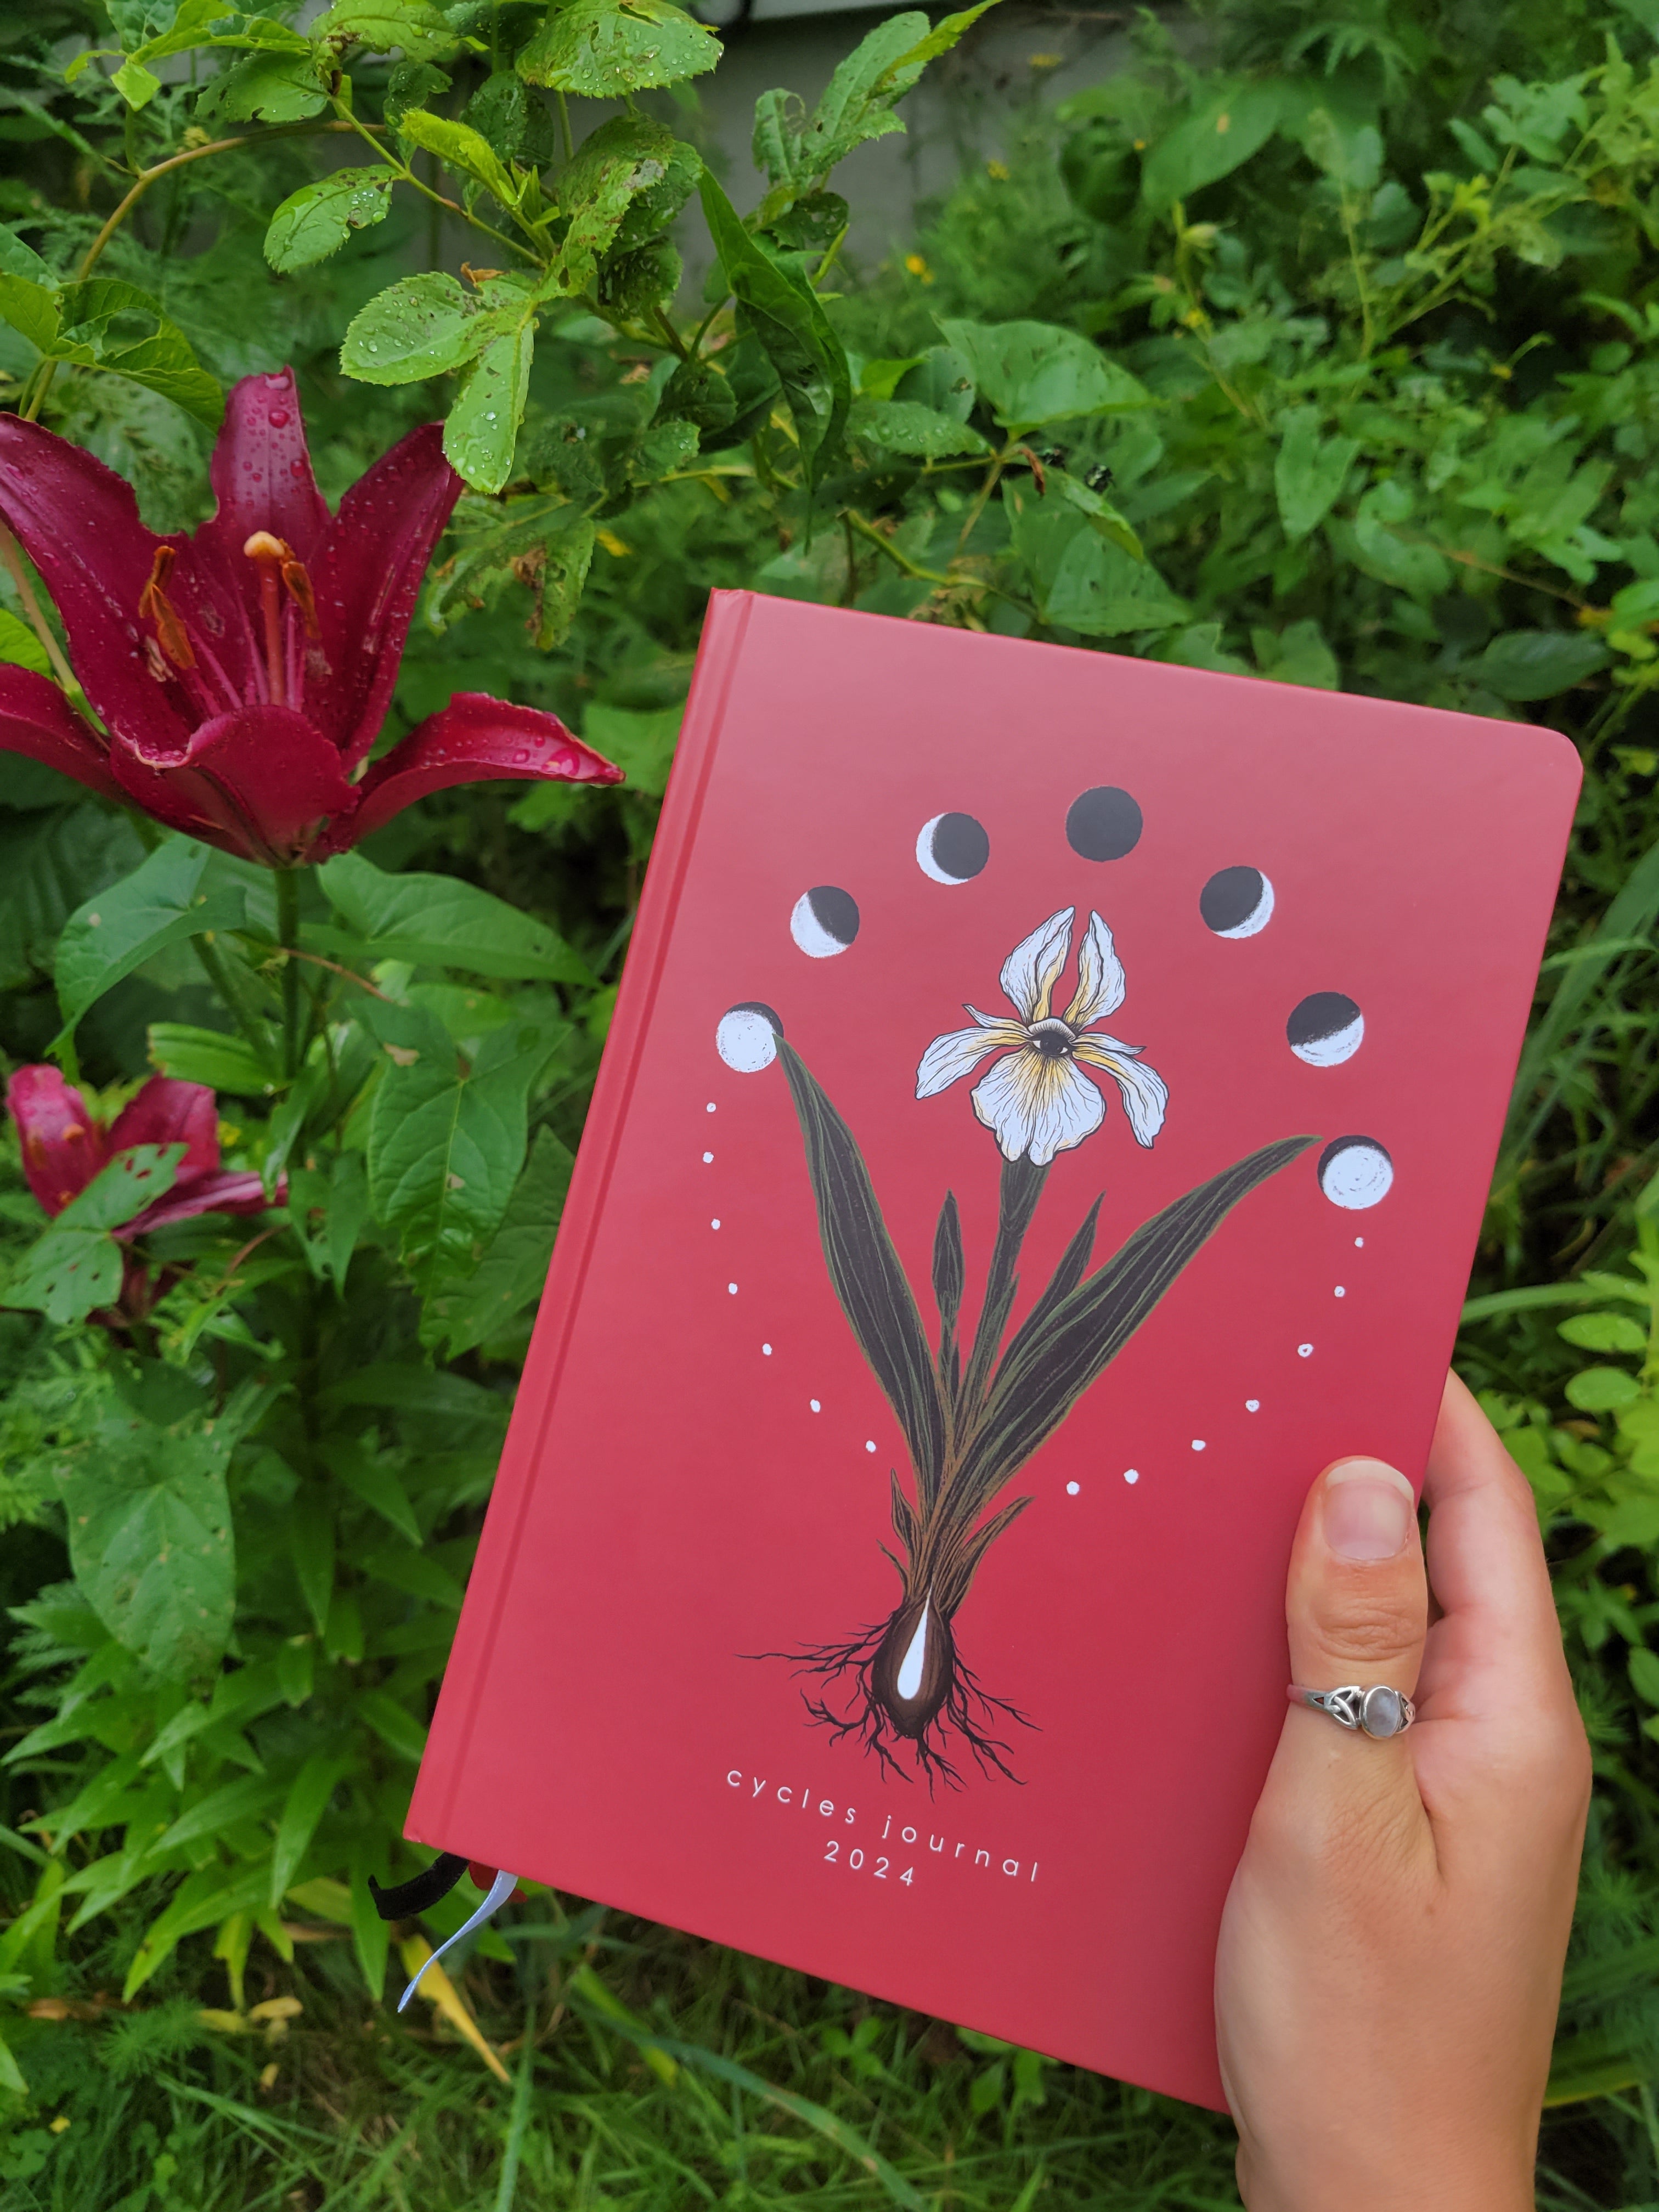 Menstrual Musings: 22 Journal prompts for the 4 phases of the menstrual +  lunar cycle